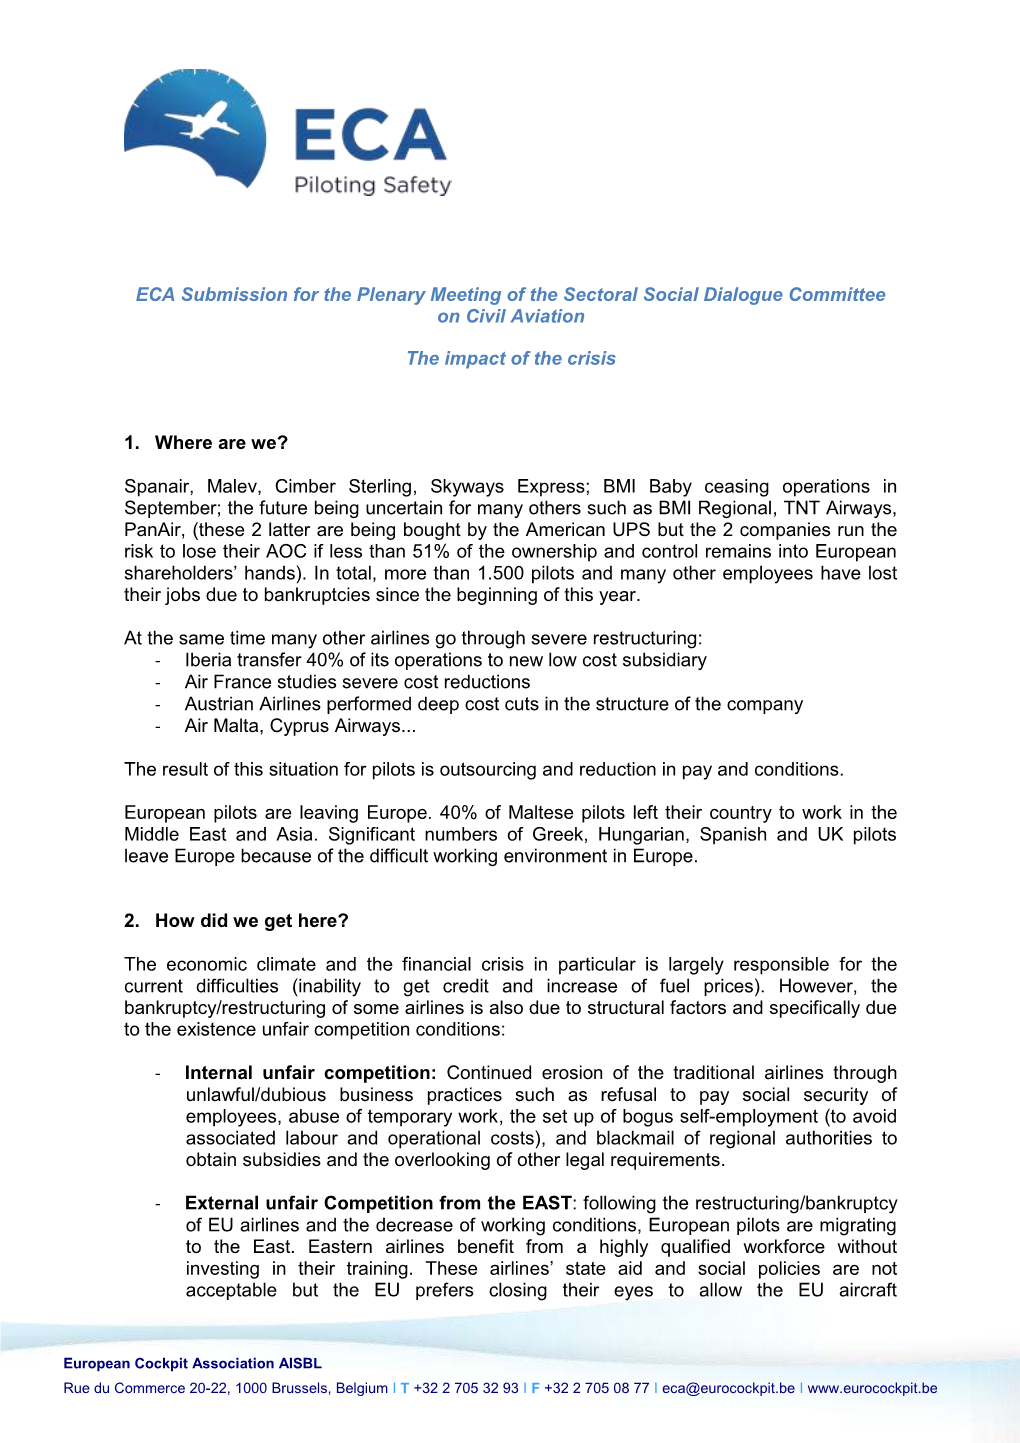 ECA Submission for the Plenary Meeting of the Sectoral Social Dialogue Committee on Civil Aviation